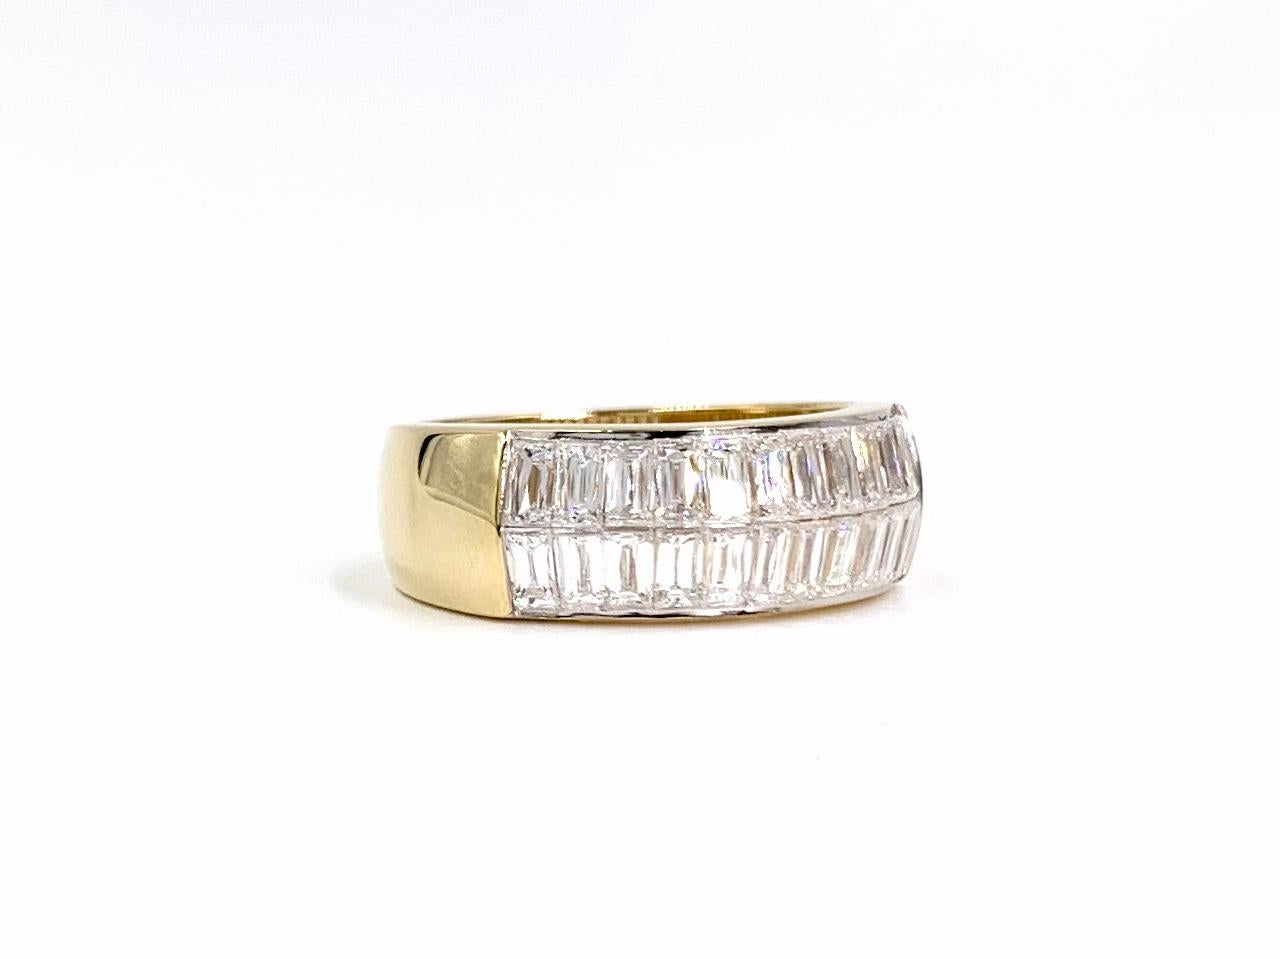 Expertly crafted by Cristopher Designs, this solid 18 karat yellow gold 7mm band features two rows of invisibly set L'Amour Crisscut baguette diamonds at 1.99 carats total weight. L'Amour crisscut diamonds have more cuts, enhanced scintillation and